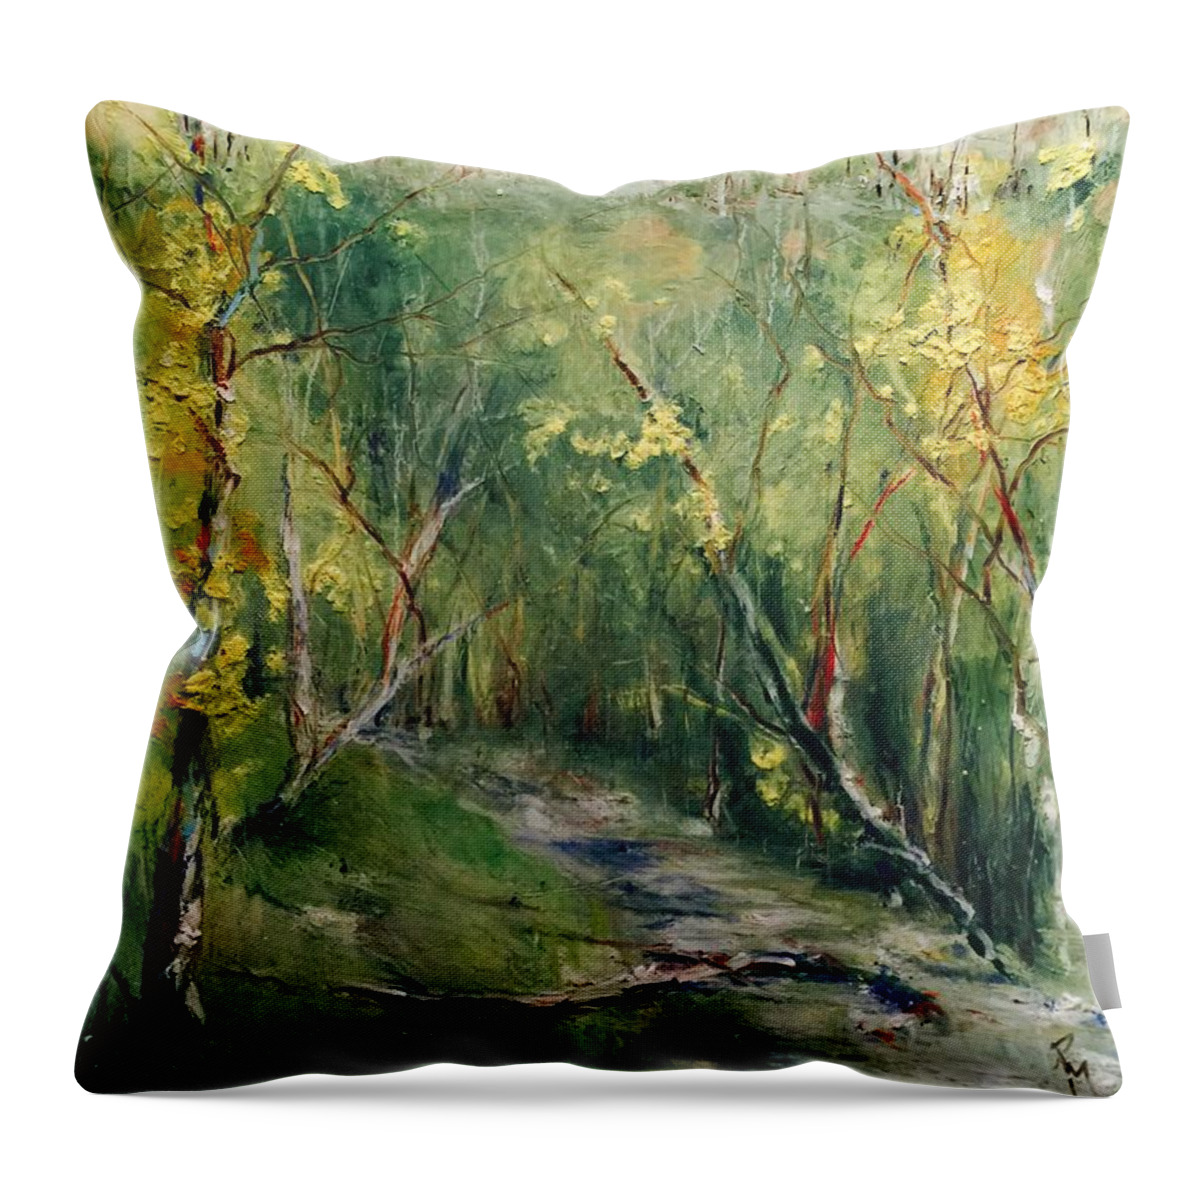  Throw Pillow featuring the painting Lost In The Moment by Robin Miller-Bookhout